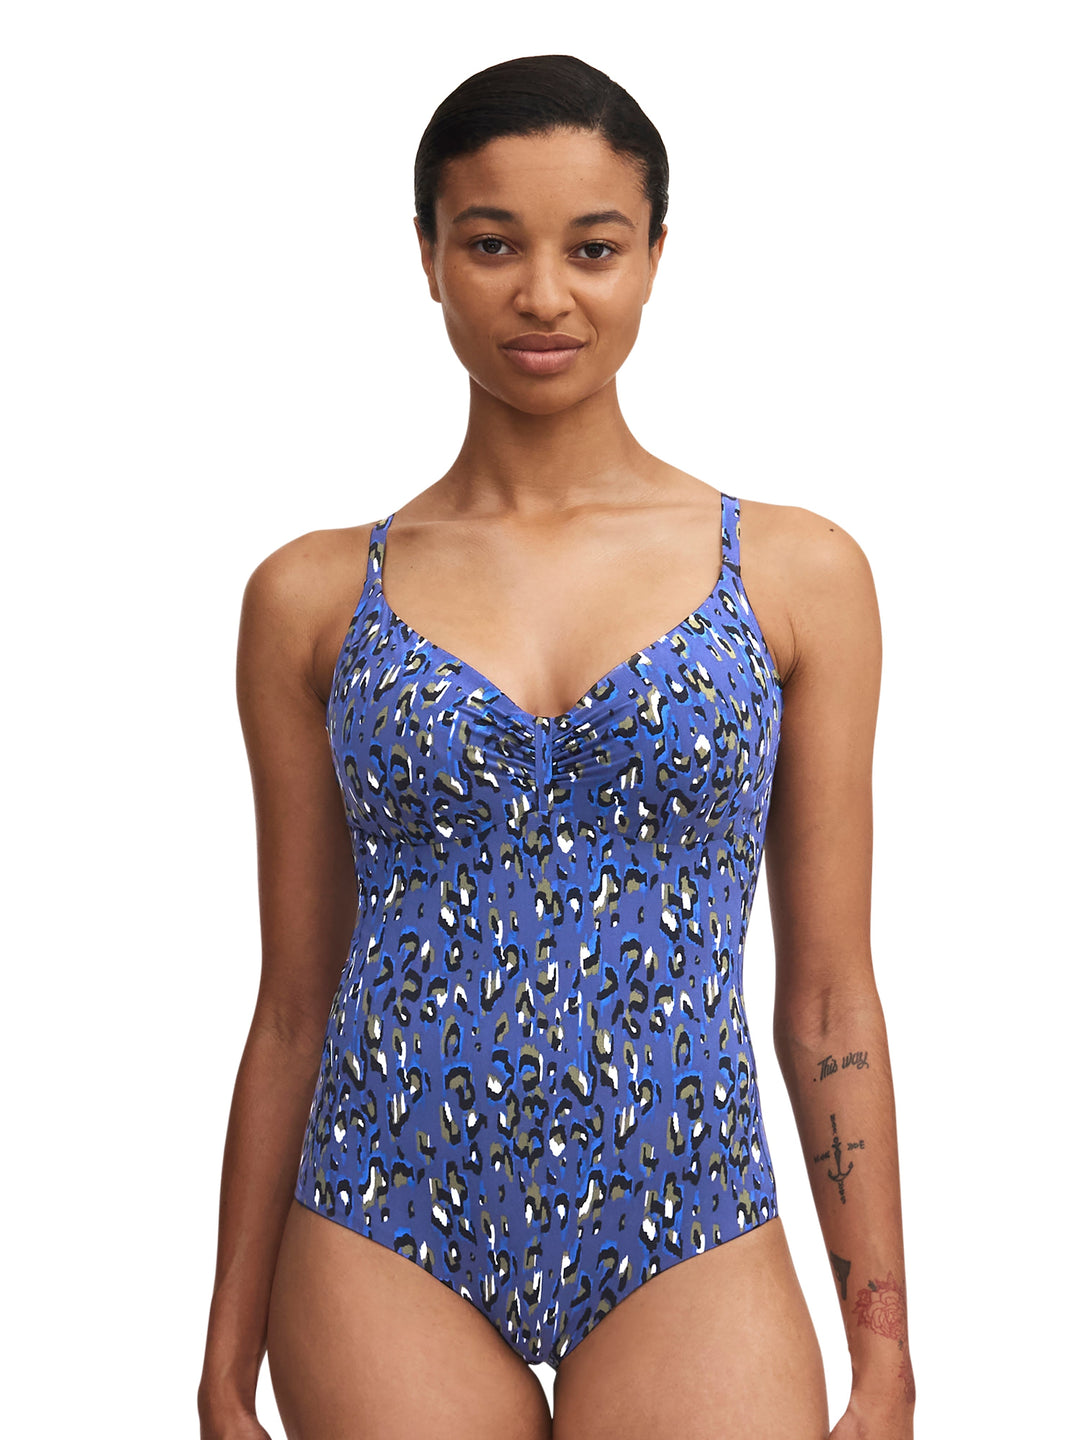 Chantelle Swimming Eos Covering Underwired Swimsuit - Blue Leopard 풀 컵 수영복 Chantelle